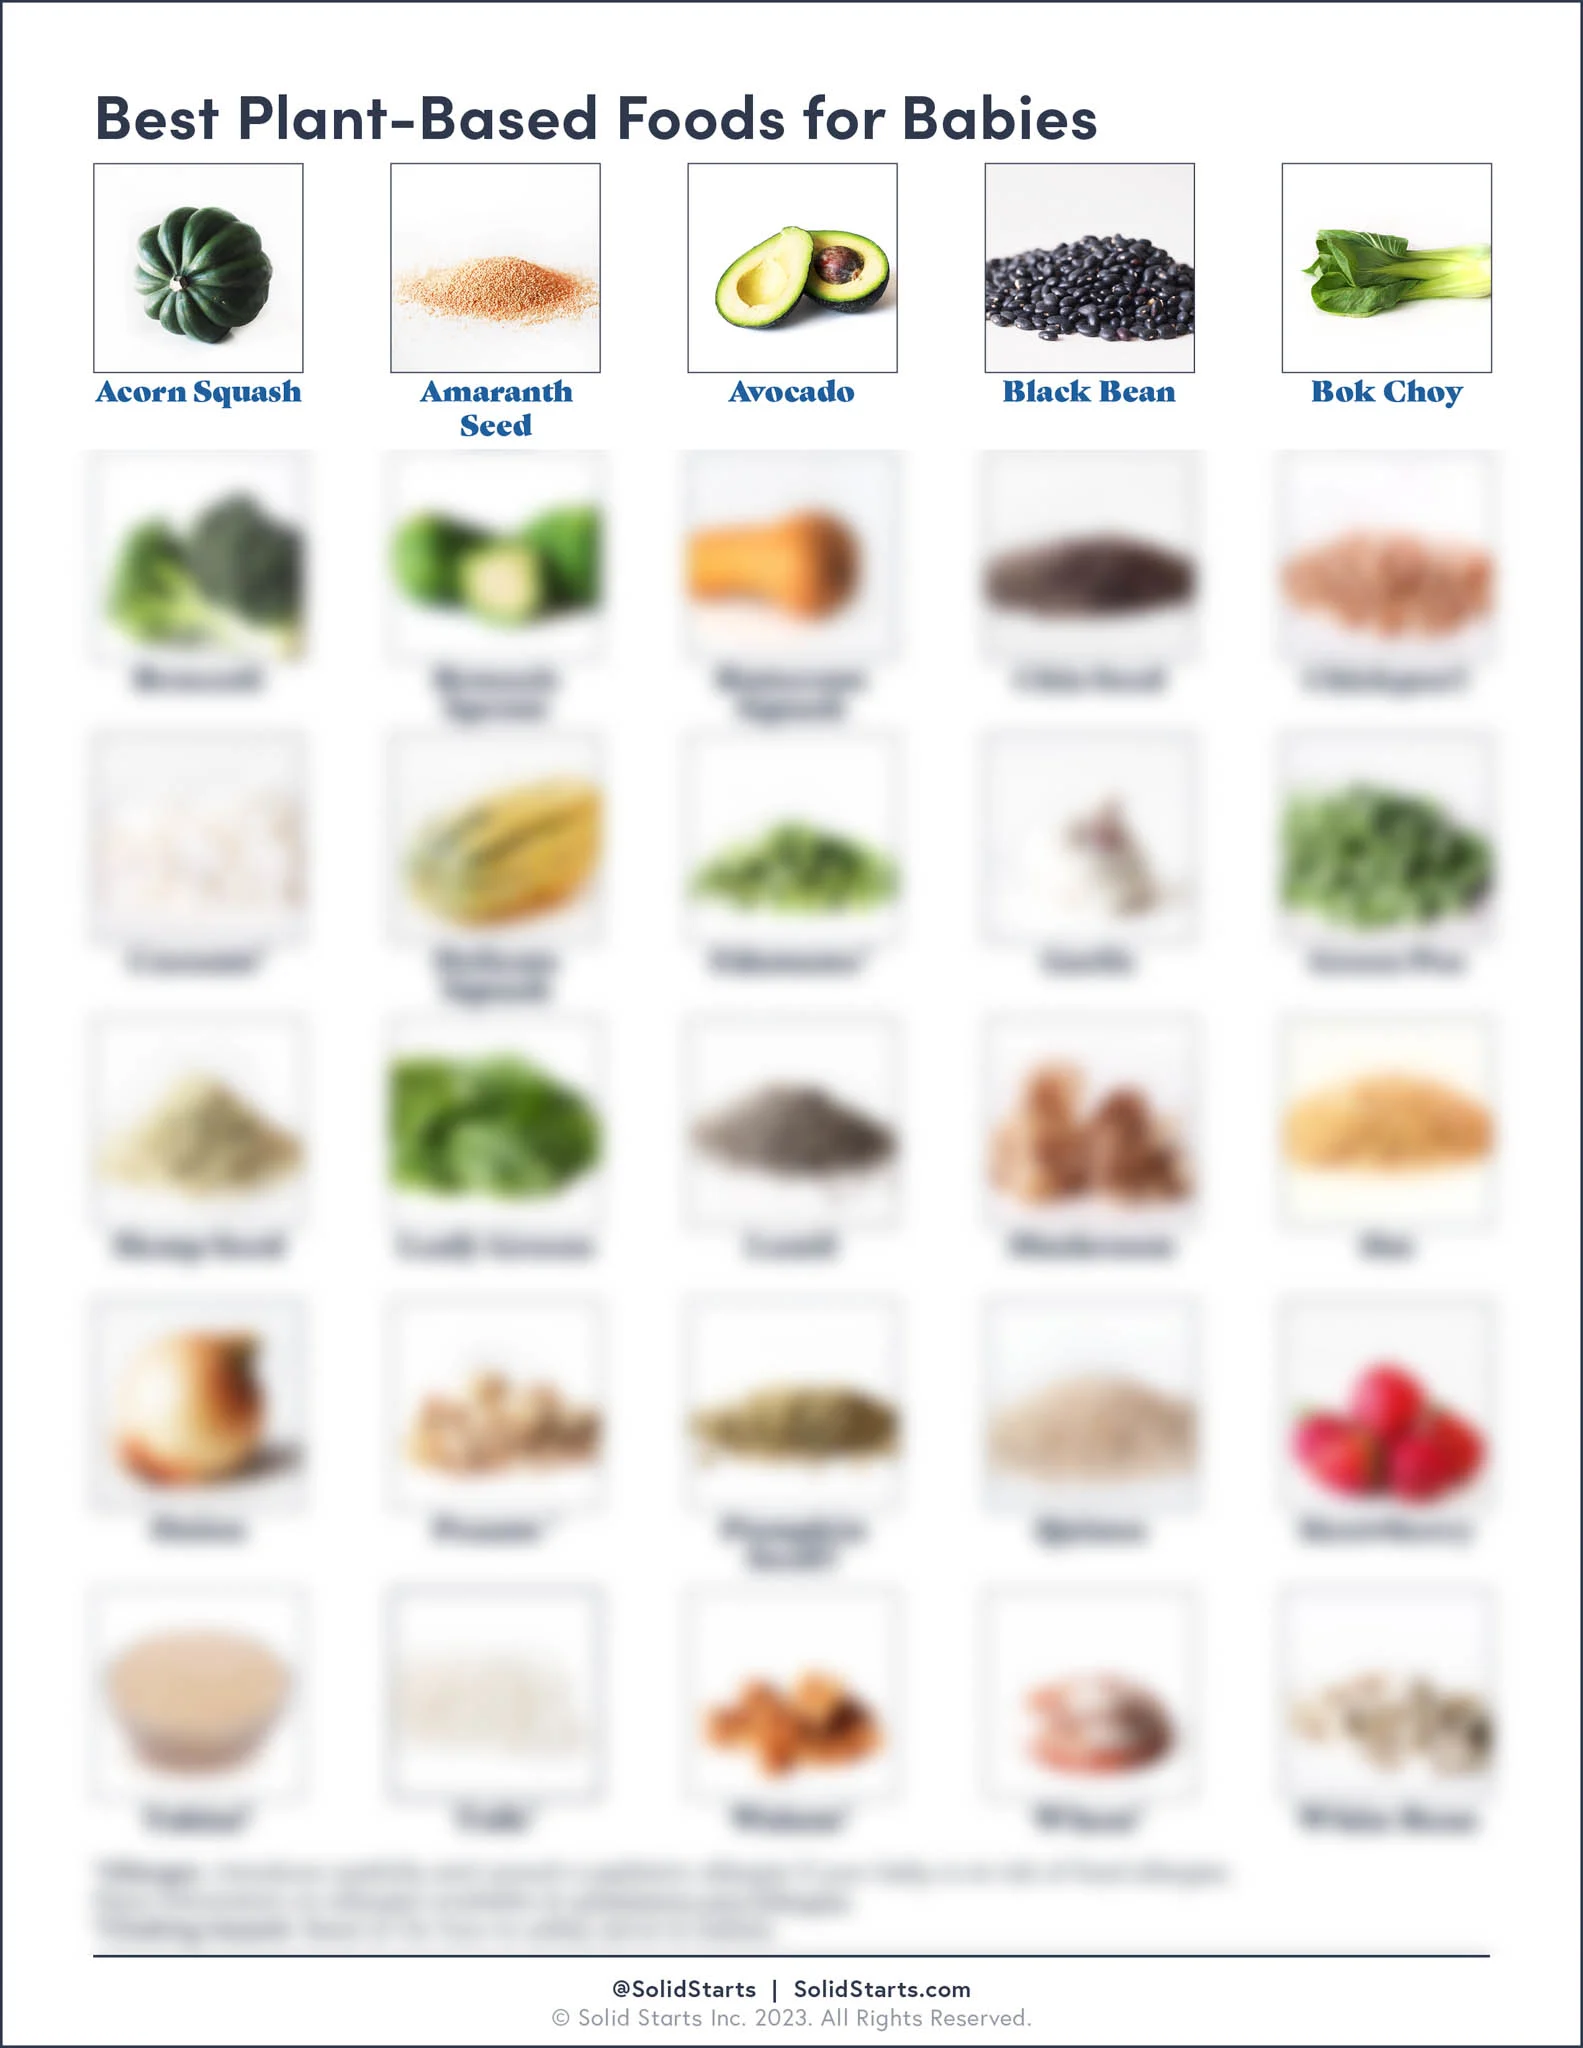 blurred preview image of the Solid Starts Plant-Based guide